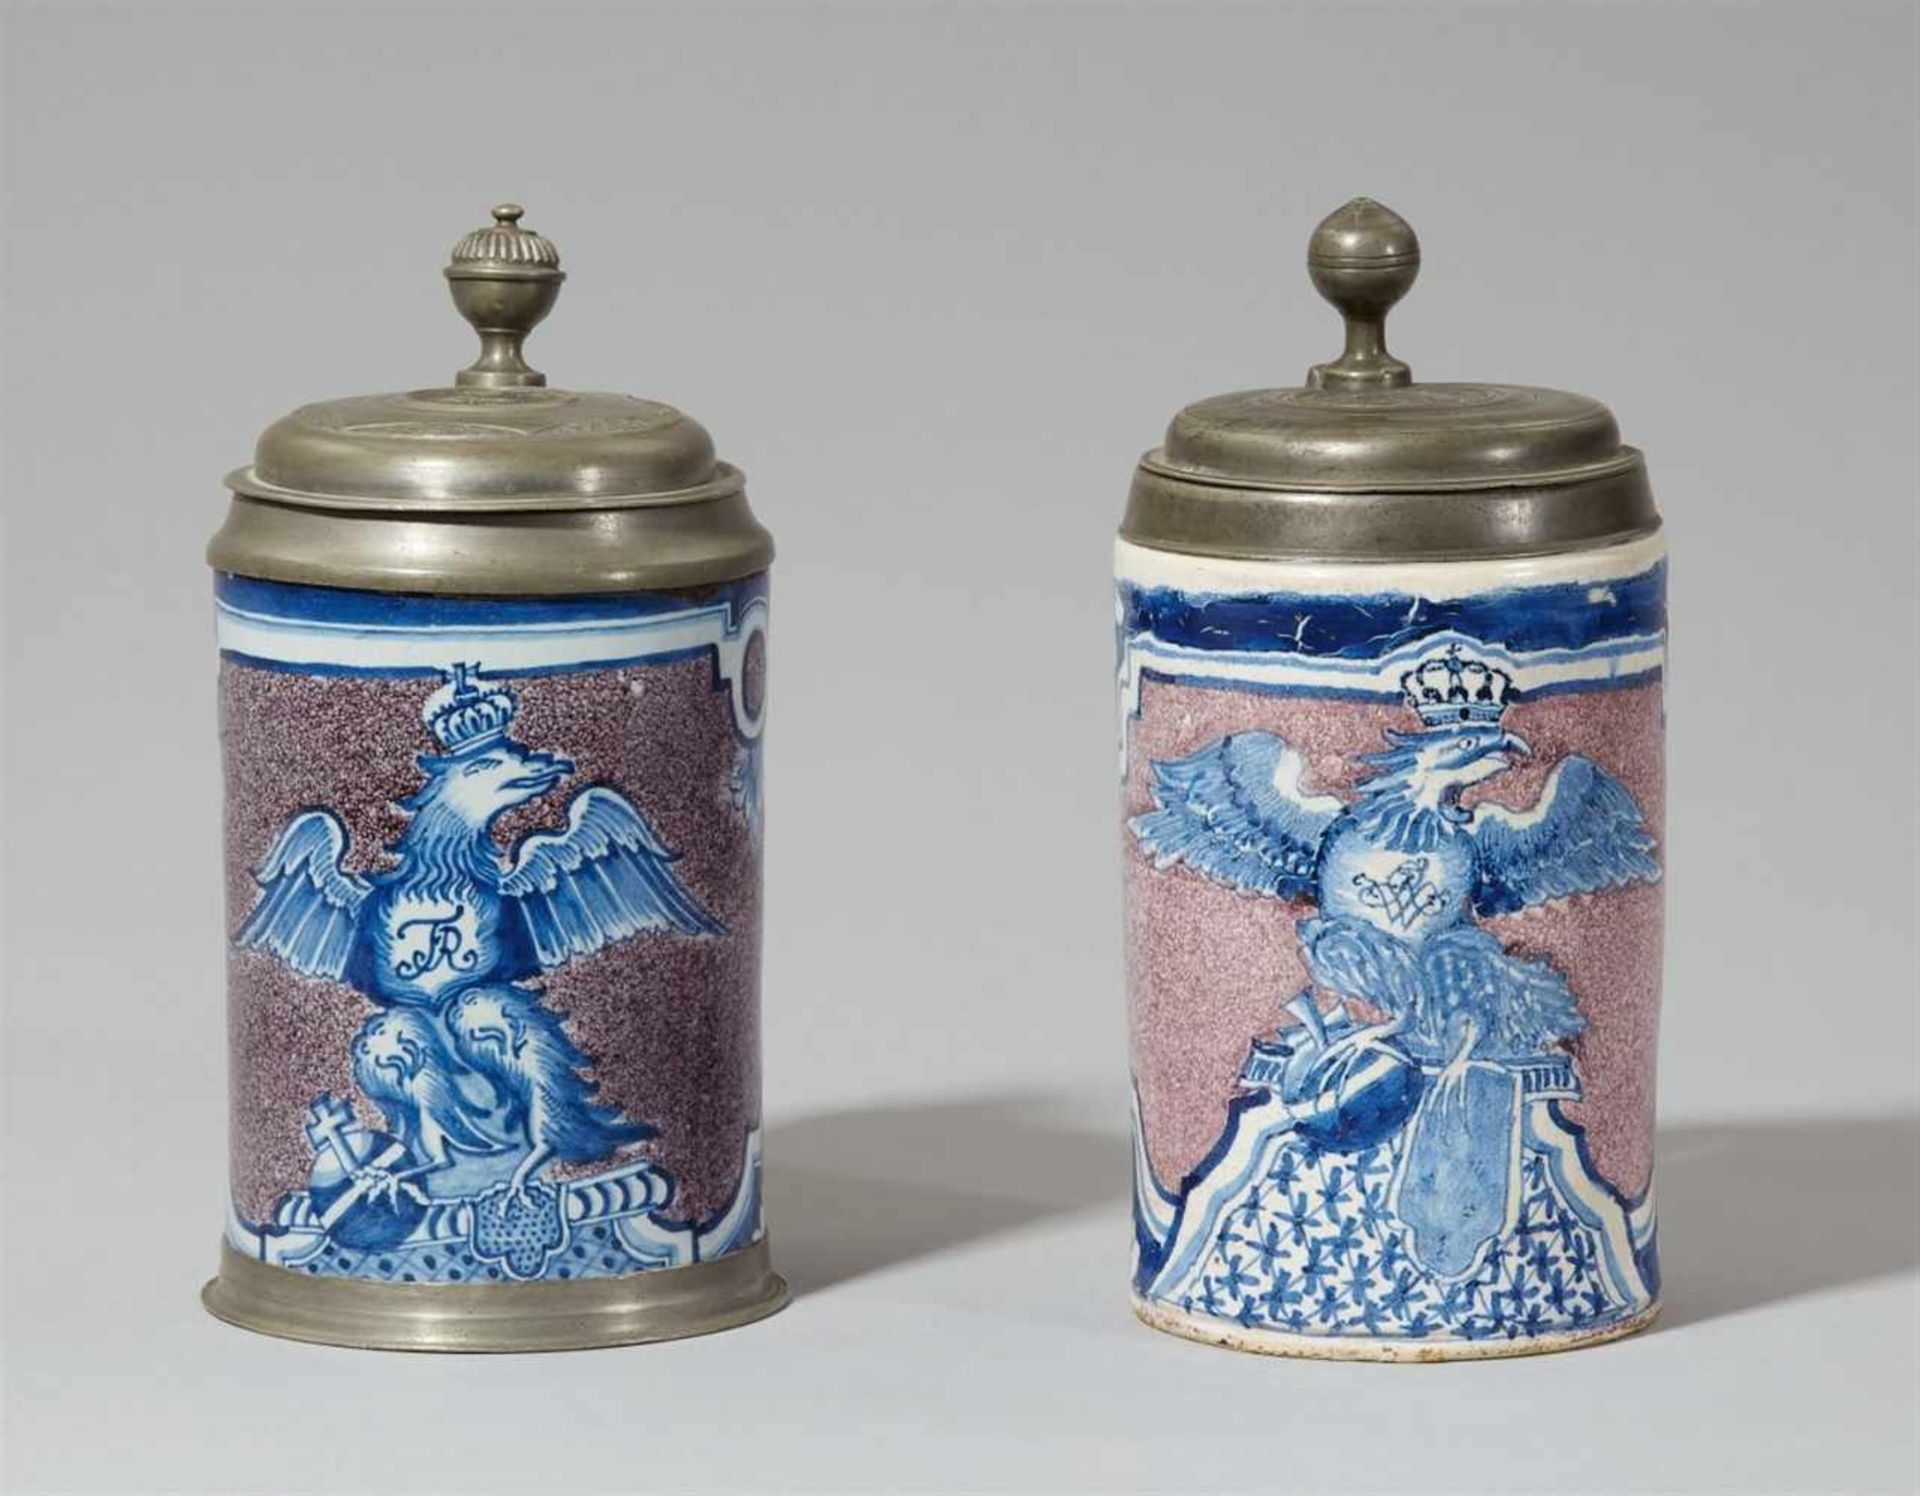 Two Berlin faience tankards commemorating two kingsDecorated with crowned eagles holding the